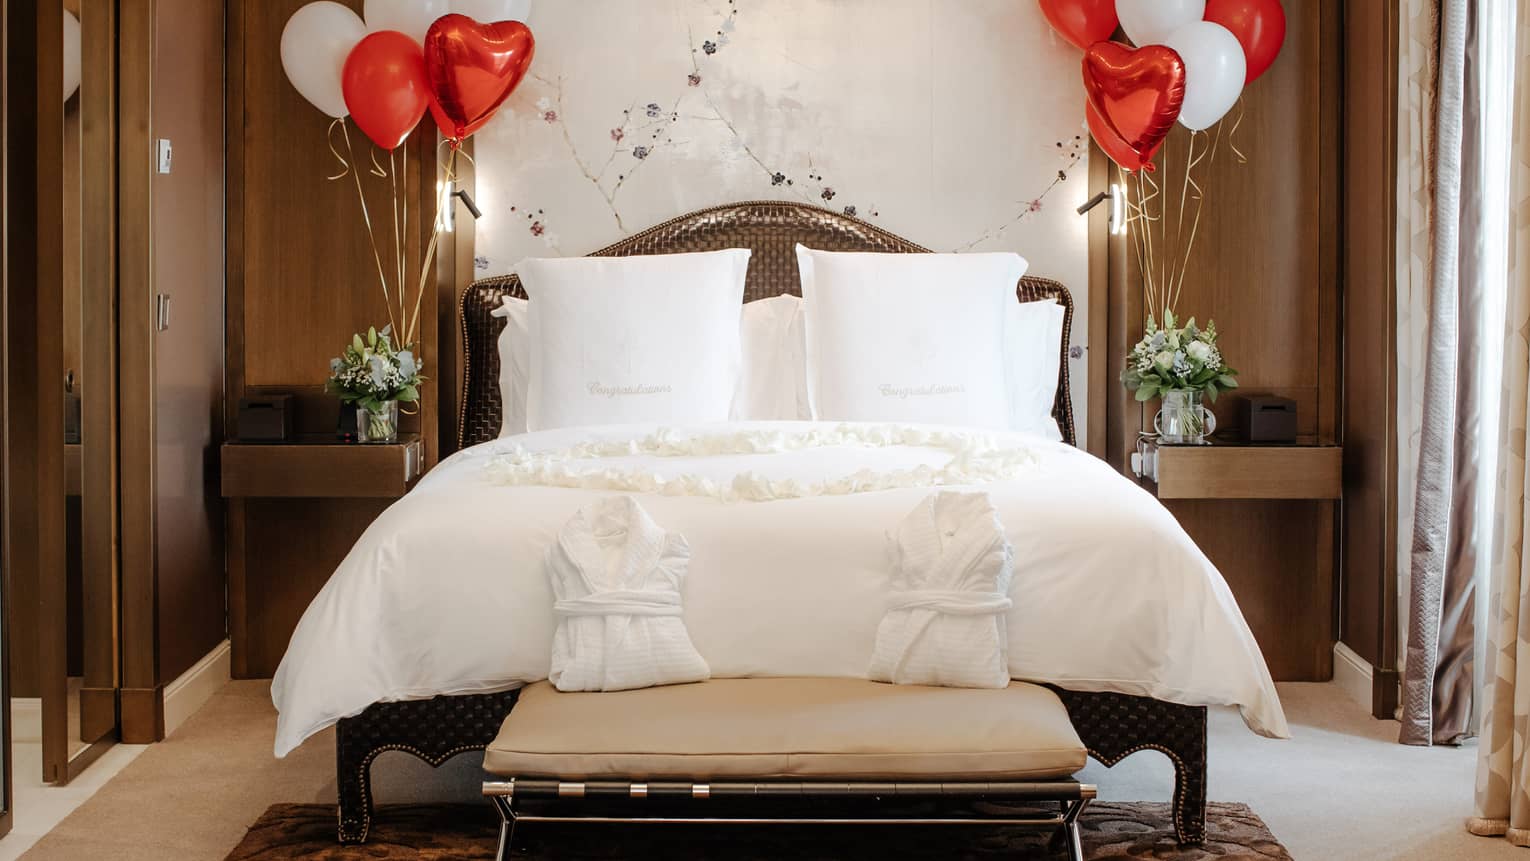 White Four Seasons bed against white wall, flanked with red and white balloons, and two white robes on foot bench